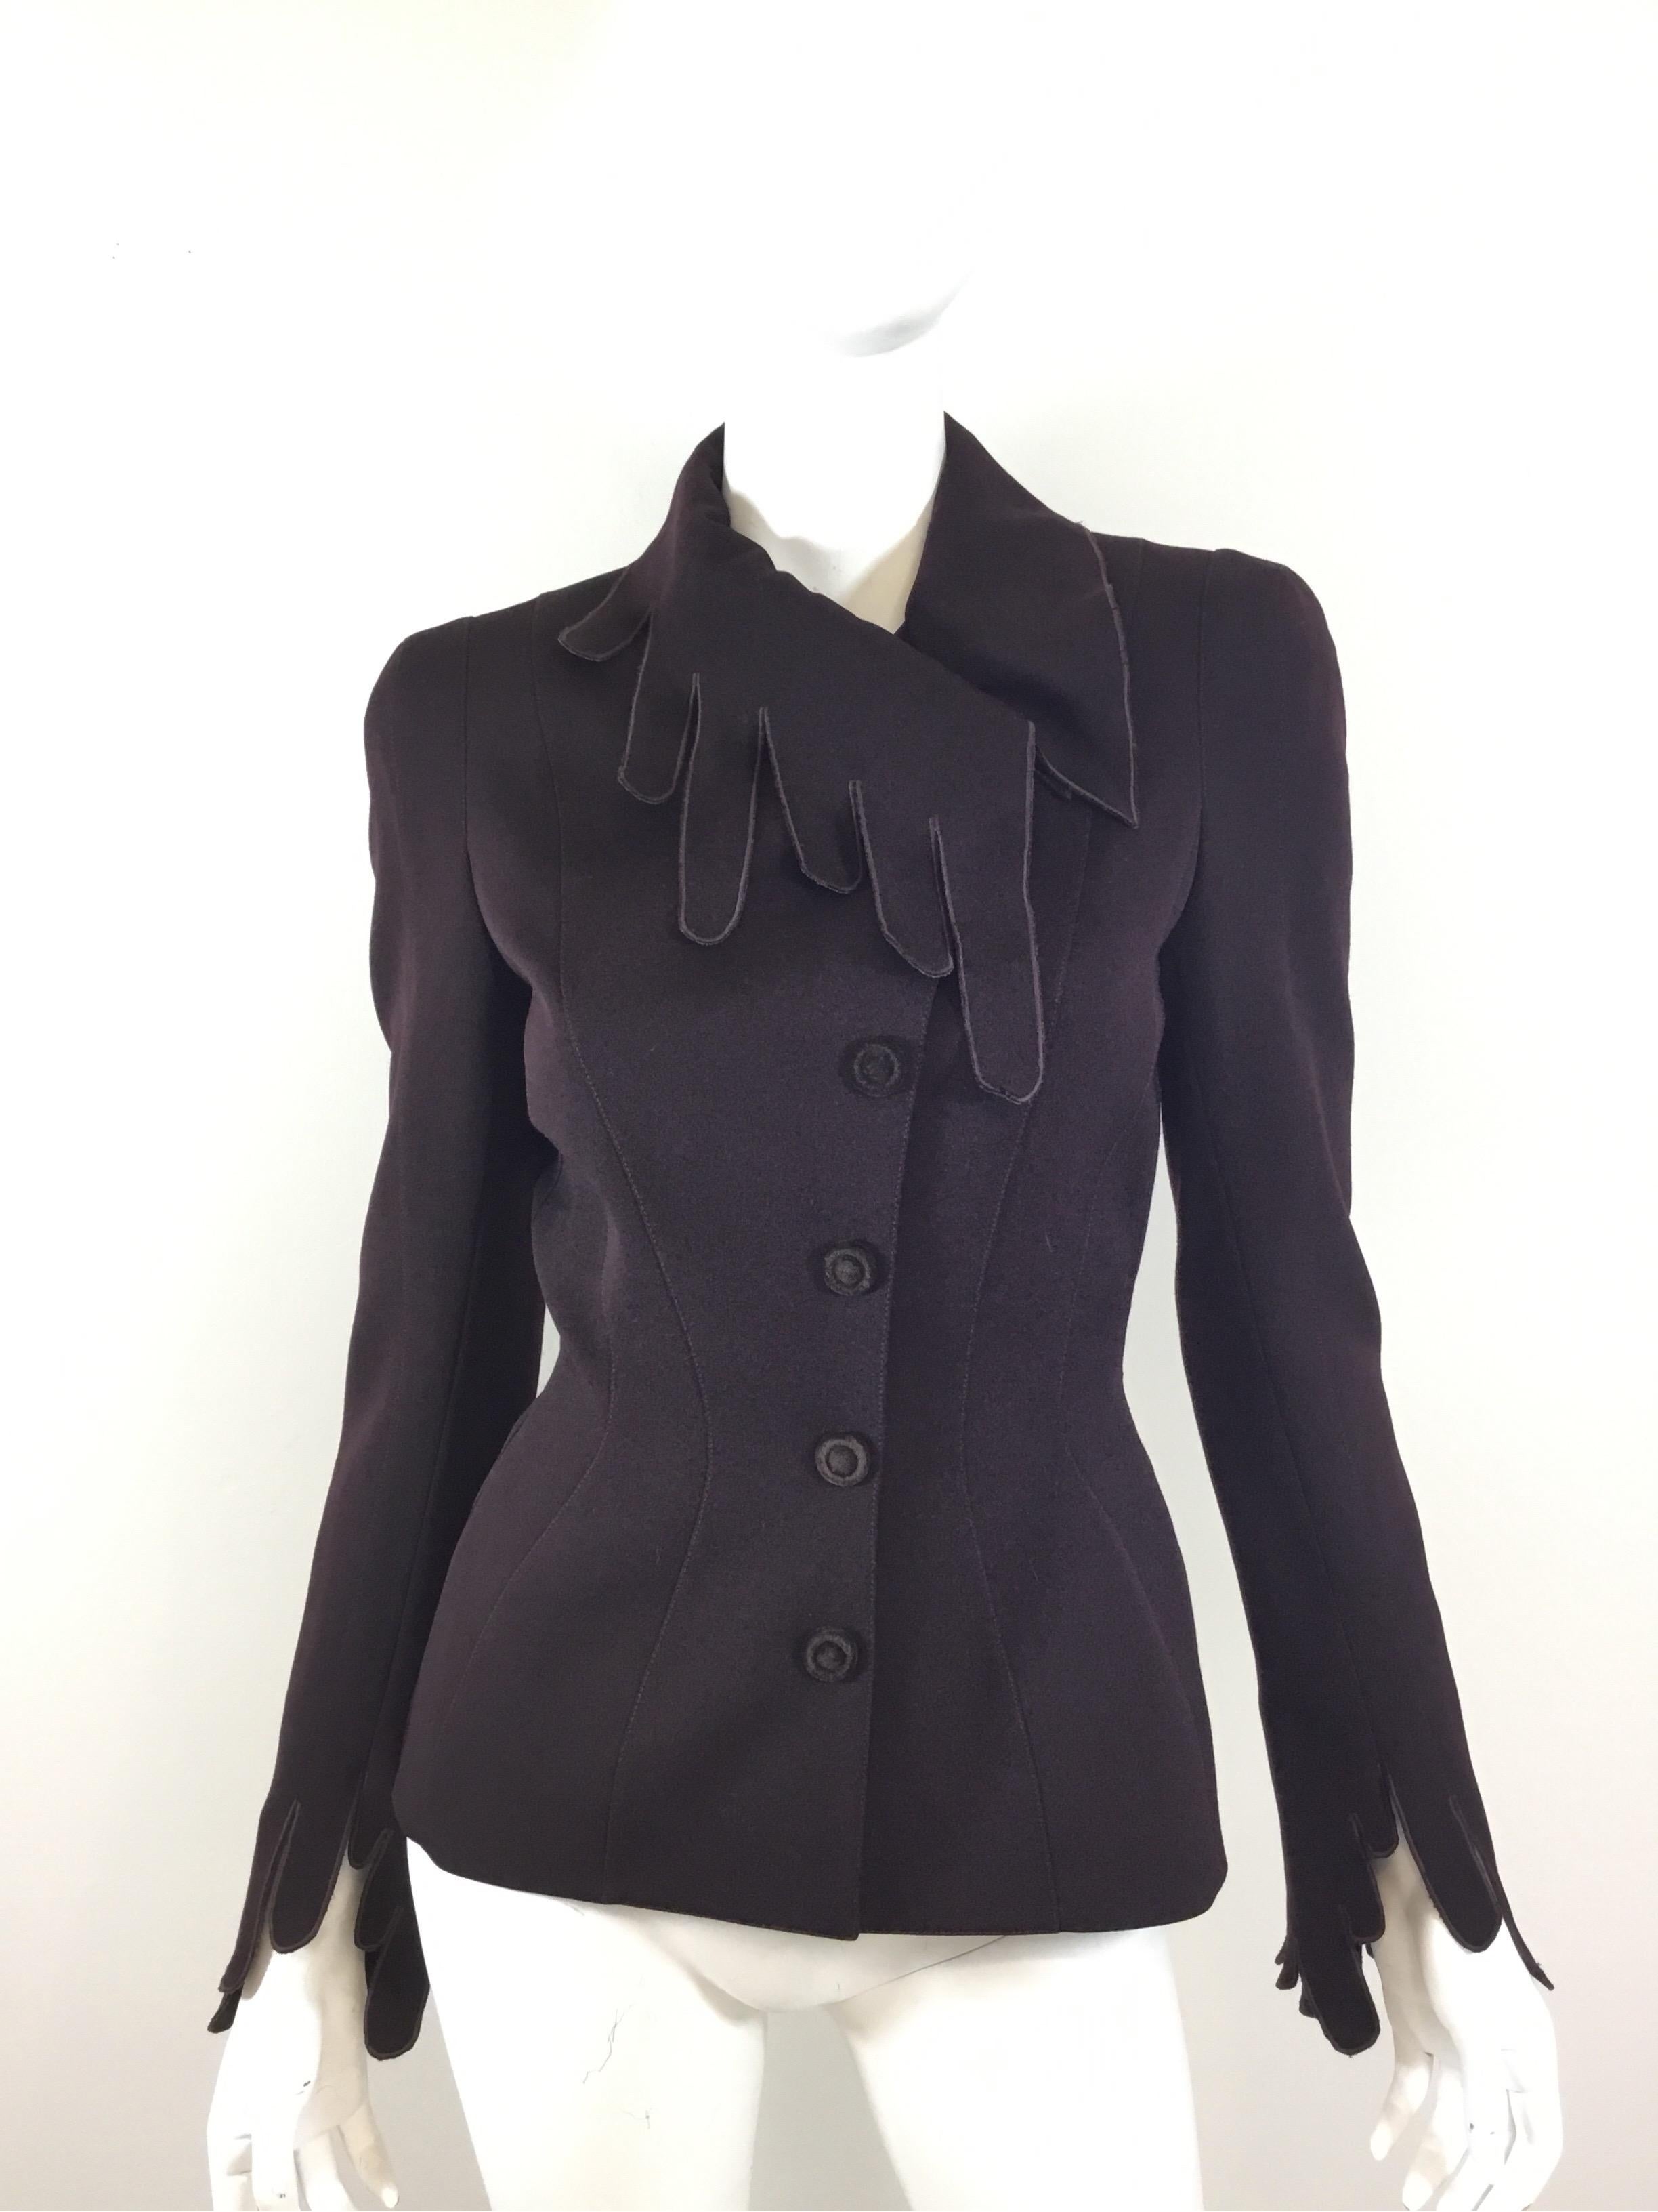 Thierry Mugler Suit with jacket and skirt (skirt is small and did not fit mannequin—see measurements + photos)

Jacket has a very unique detail along the trimming with velvet lining. Snap button closures and full lining. Labeled Size 36, 100%